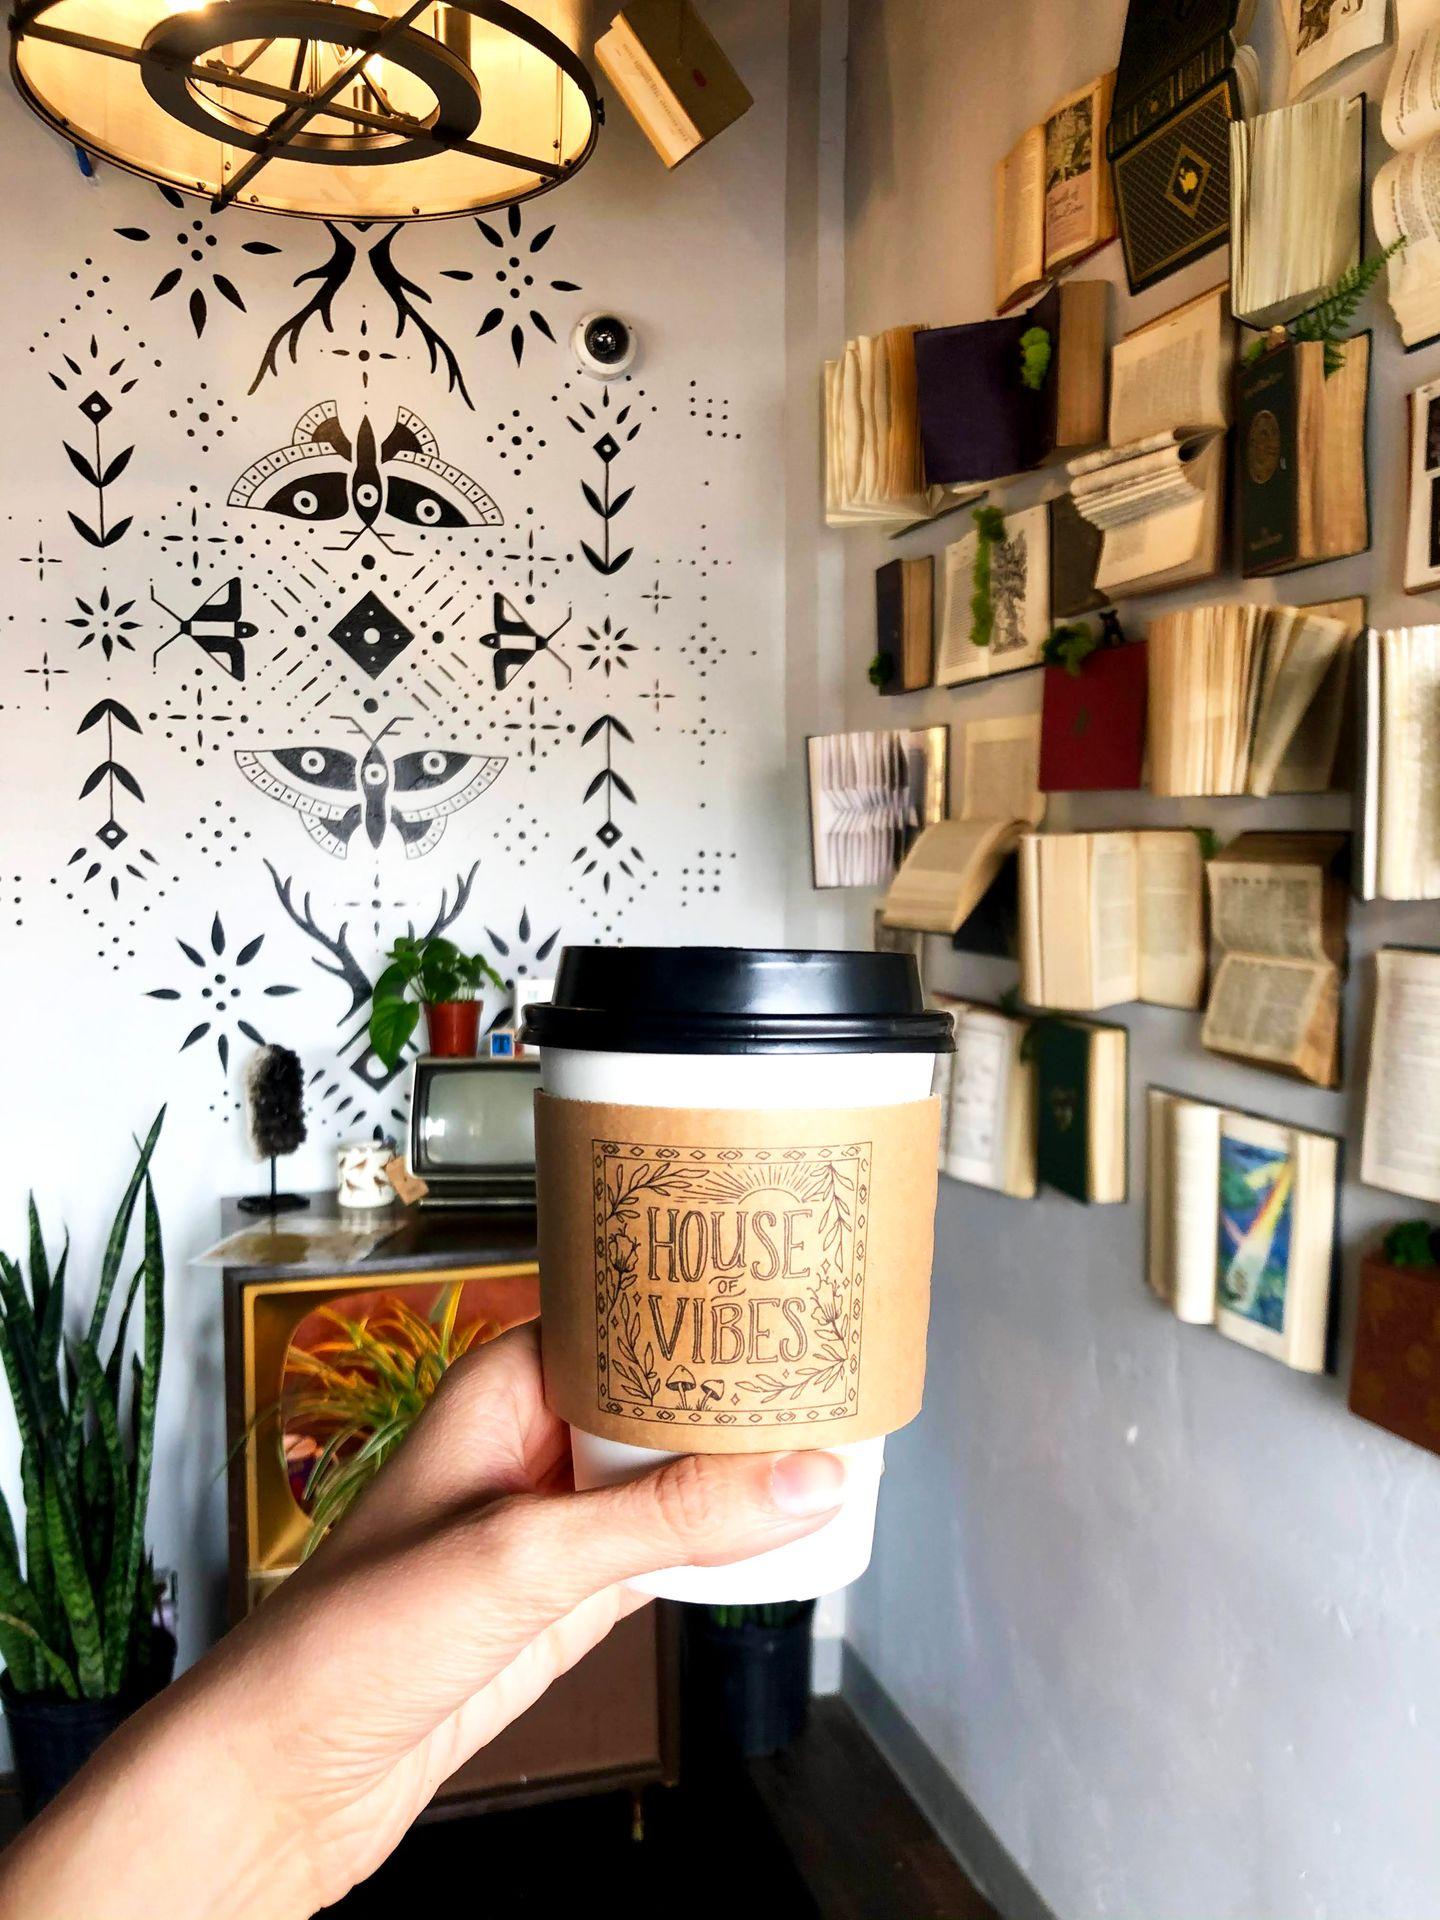 Holding up a coffee in the entry of House of Vibes. The wall is covered in books and a geomtric pattern. There is also a vintage table with some plants.